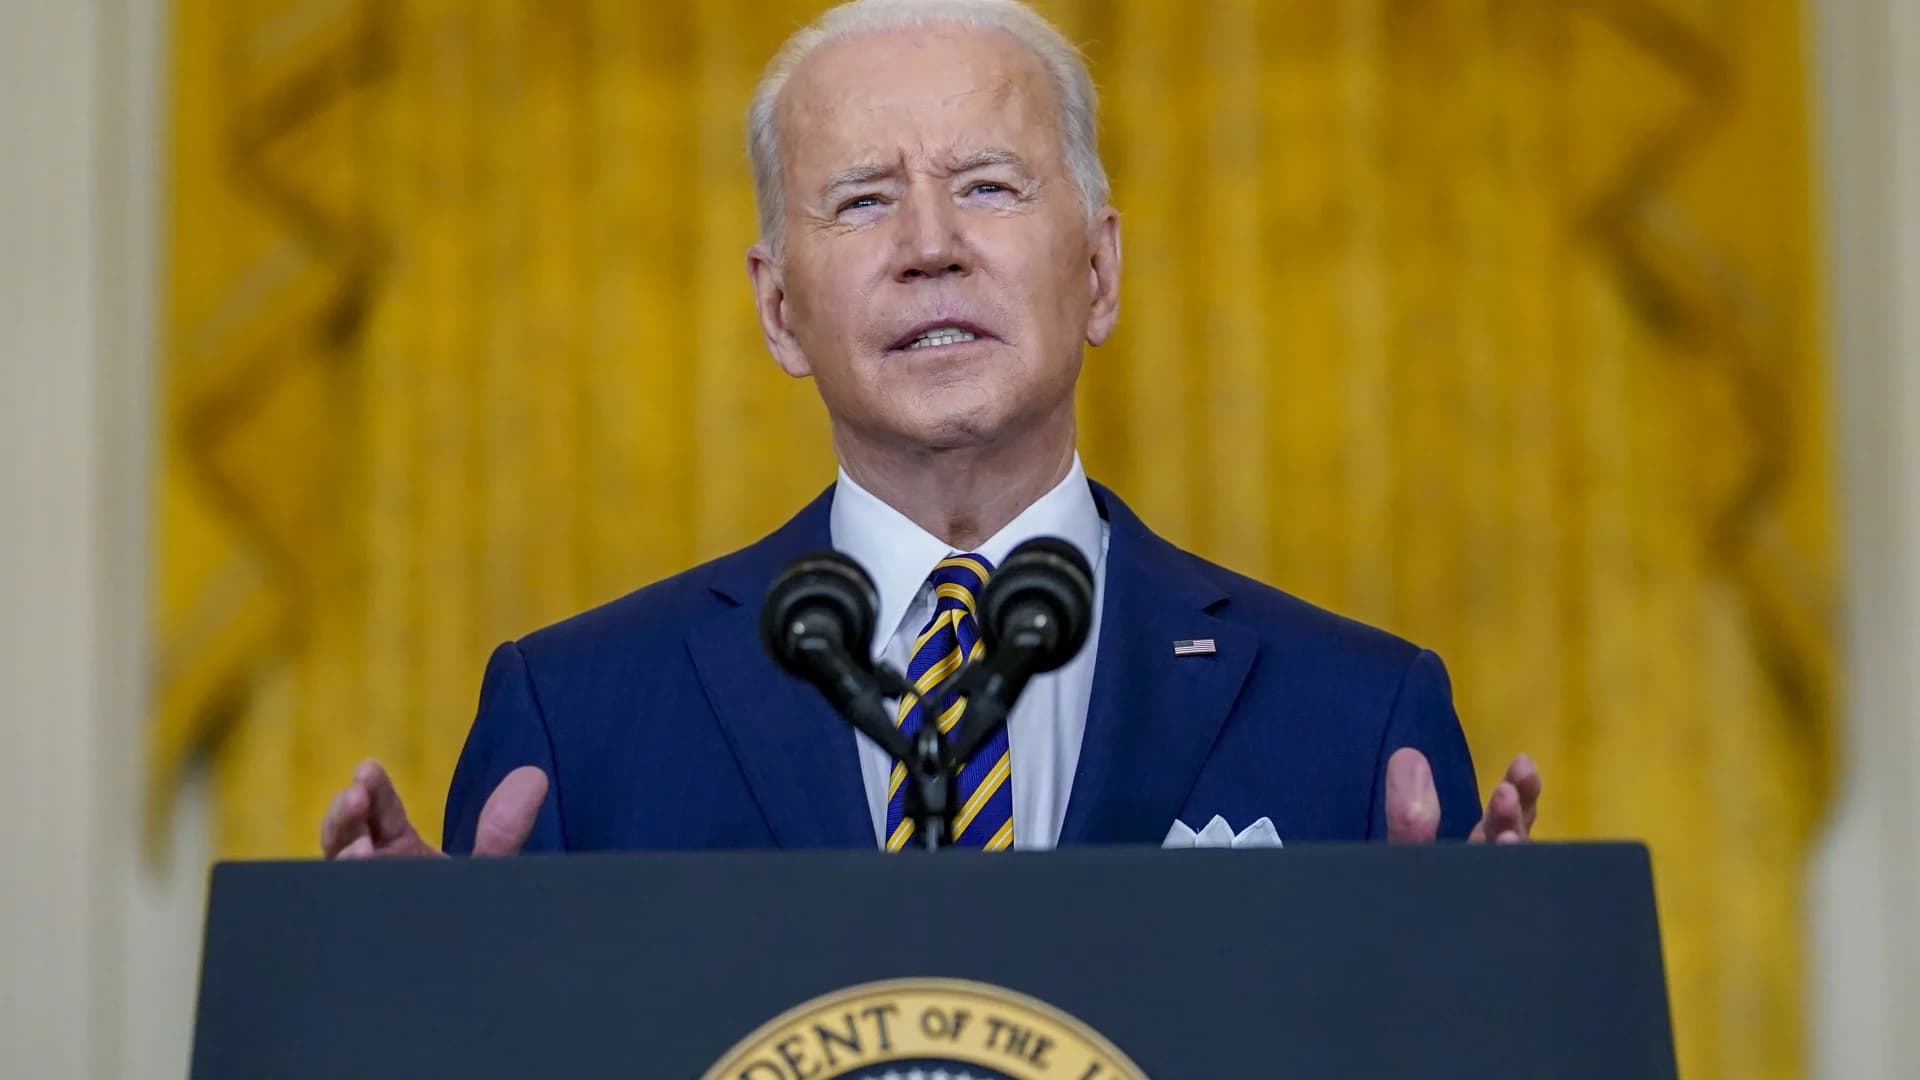 WATCH: President Biden holds news conference to mark end of first year in office